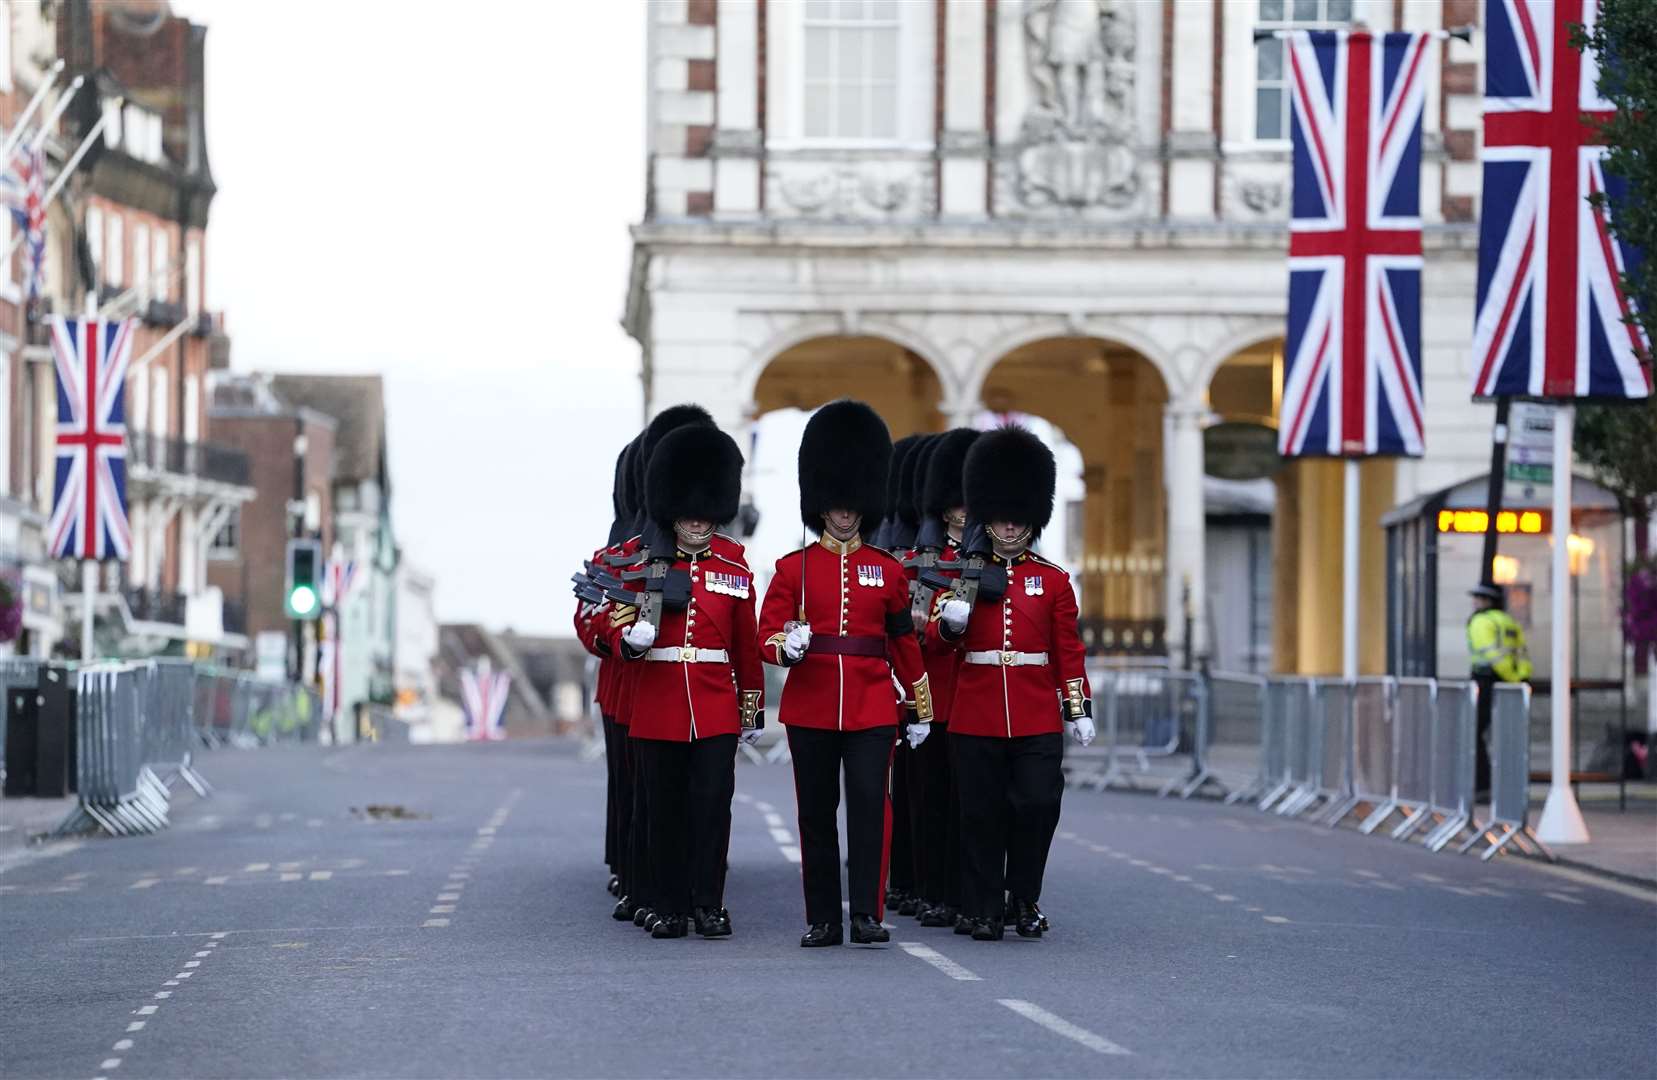 Coldstream Guards could be seen in the town (Andrew Matthews/PA)